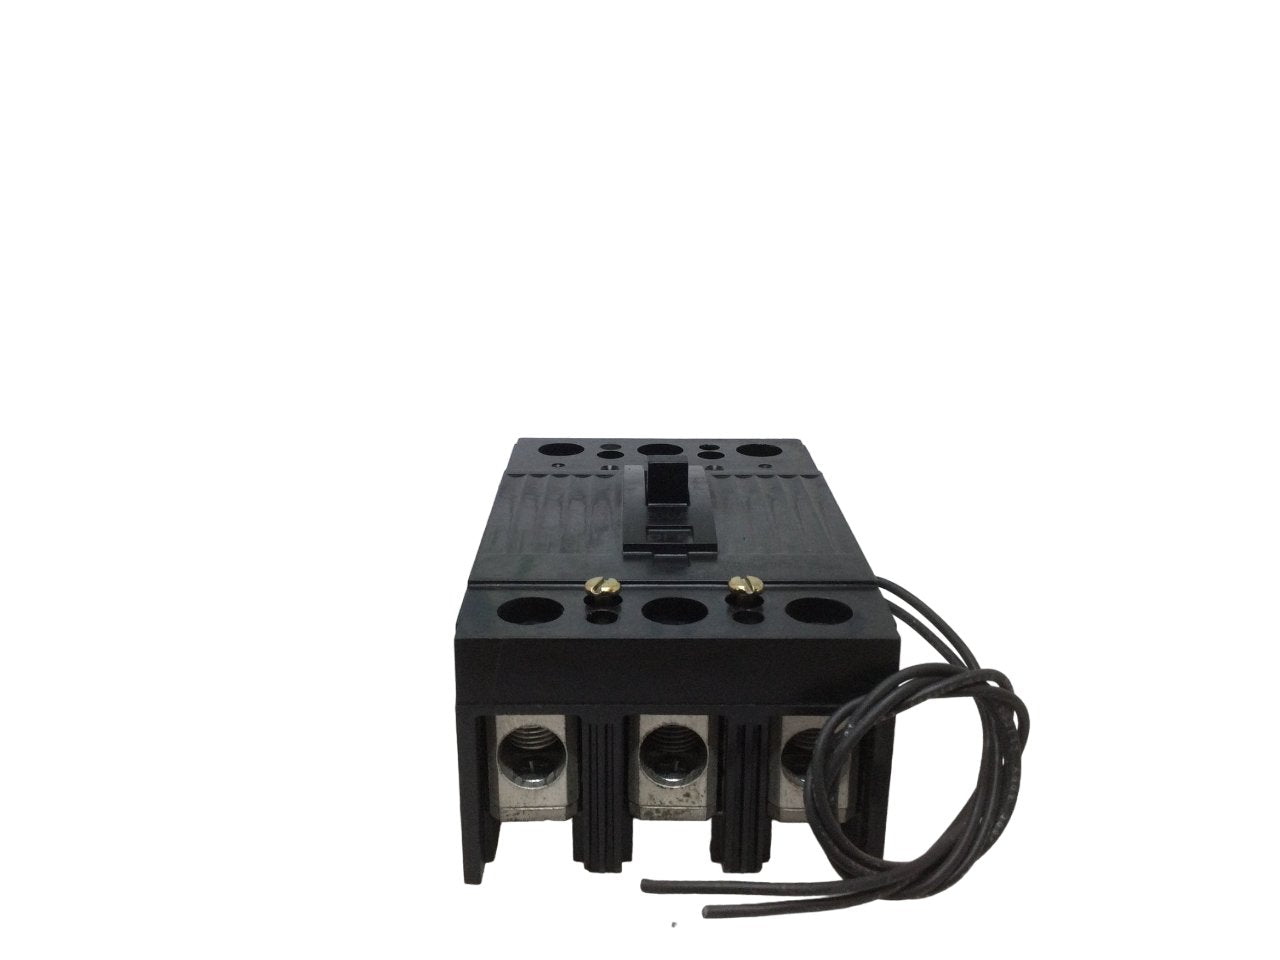 THQD32200ST1 - General Electrics - Molded Case Circuit Breakers